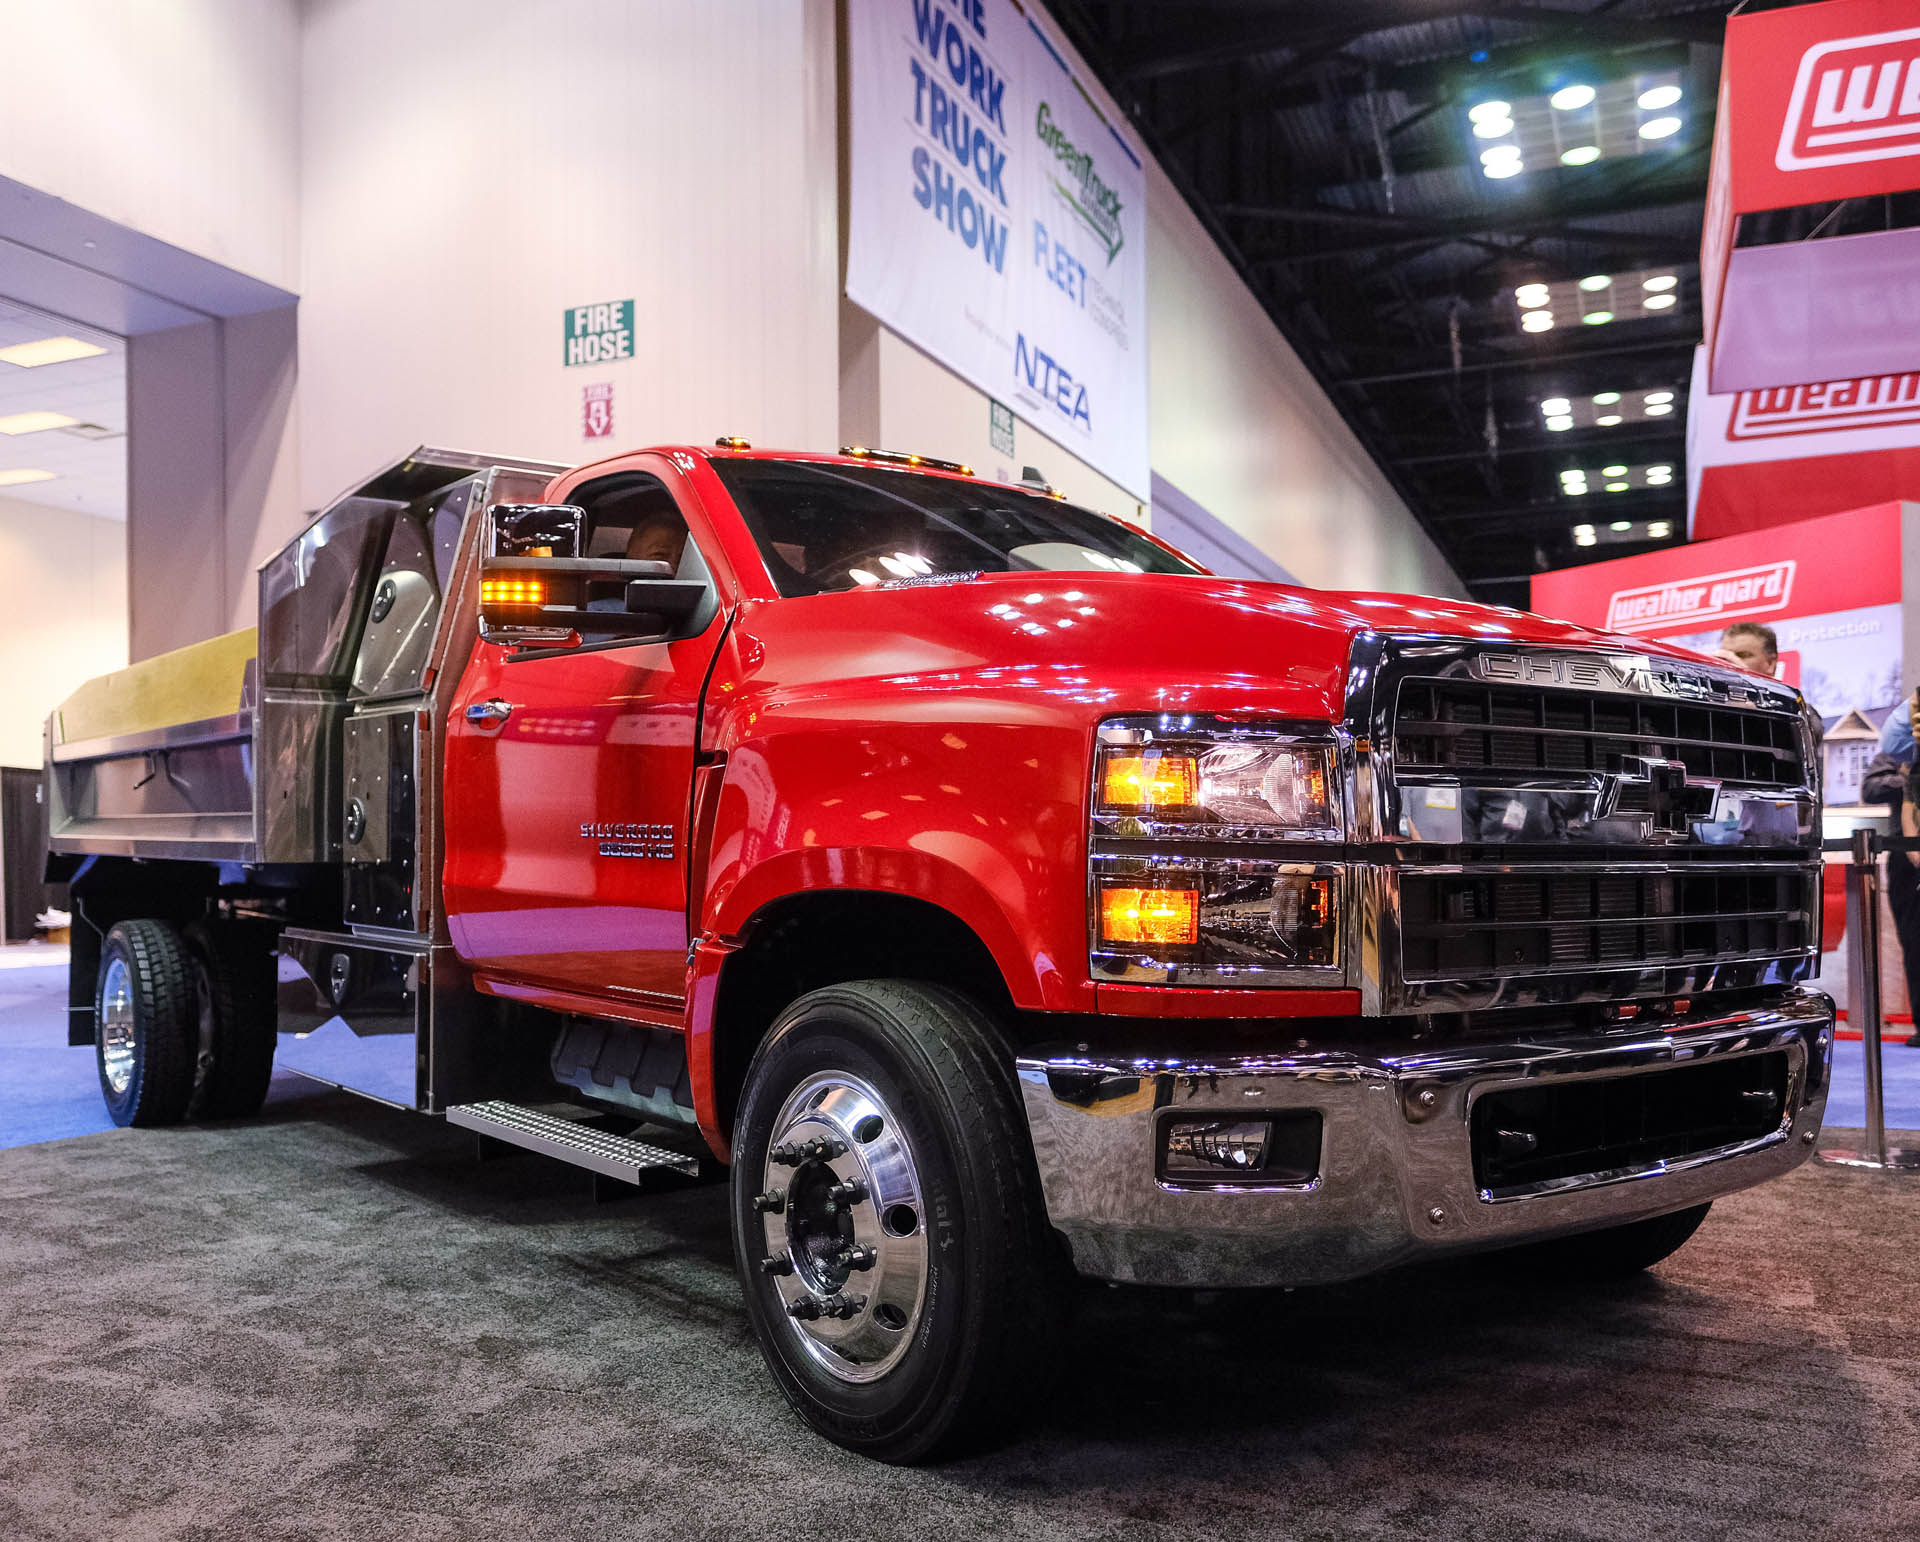 Chevy Gets Back Into Big Truck Game With Super-Ultra Extra Heavy-Duty Silverado